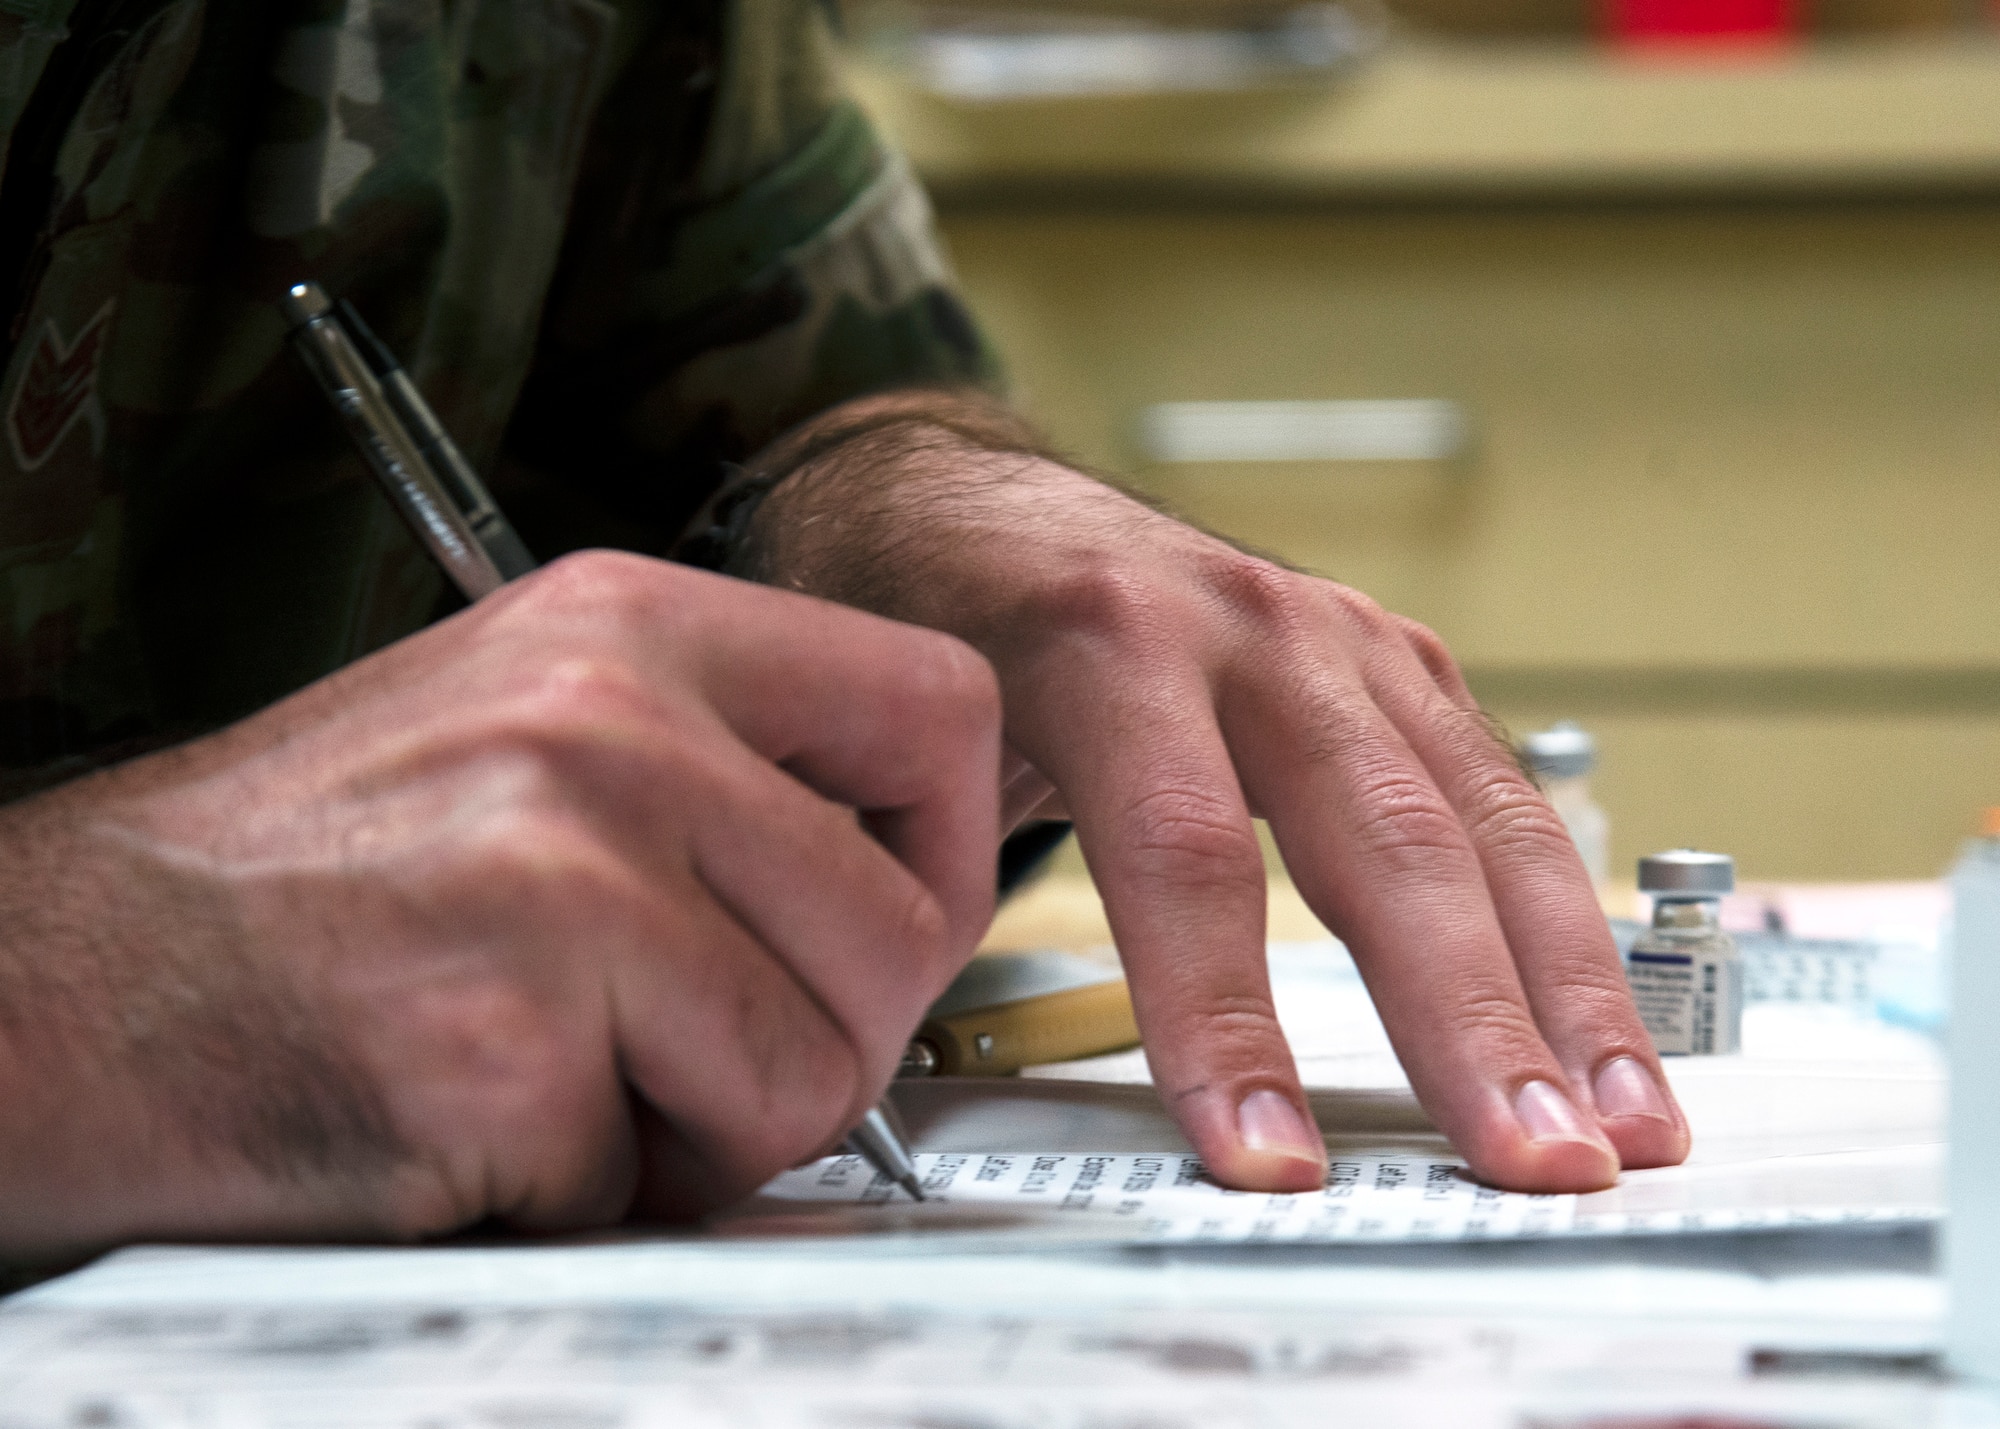 Staff Sgt. James Stephens from the 6th Medical Support Squadron annotates dates on labels while preparing COVID-19 vaccines for distribution at MacDill Air Force Base, Florida, Sept. 30, 2021.